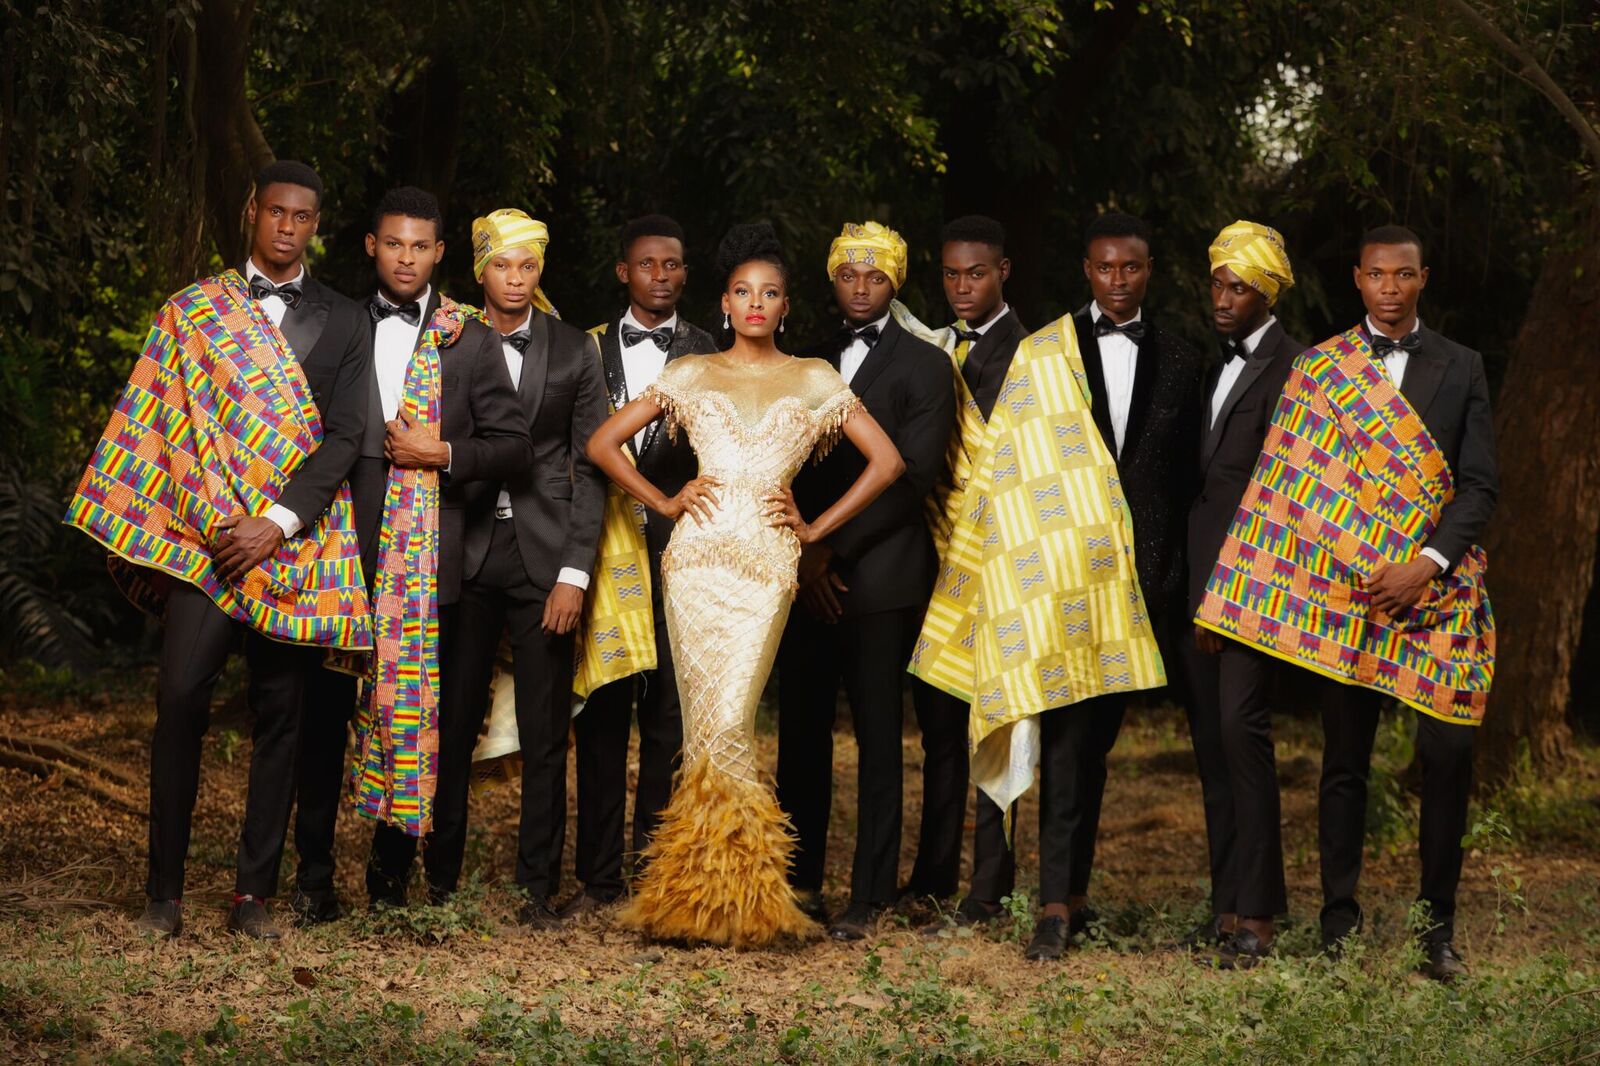 GLAM AFRICA celebrates African Weddings with its first Bridal Issue